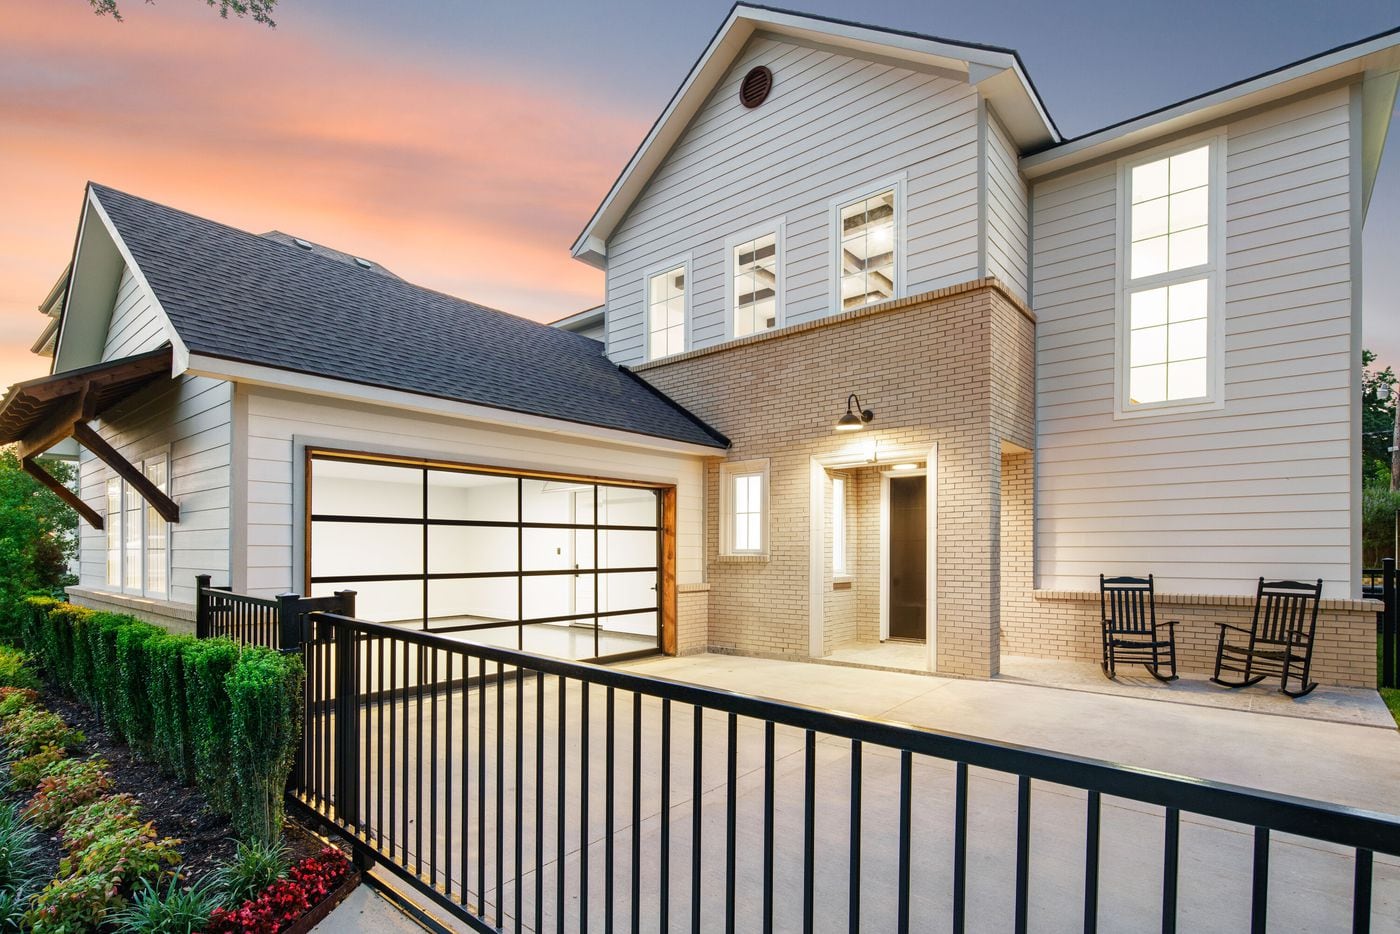 Take a look at the exterior of the home at 3935 Lively Lane in Dallas, TX.